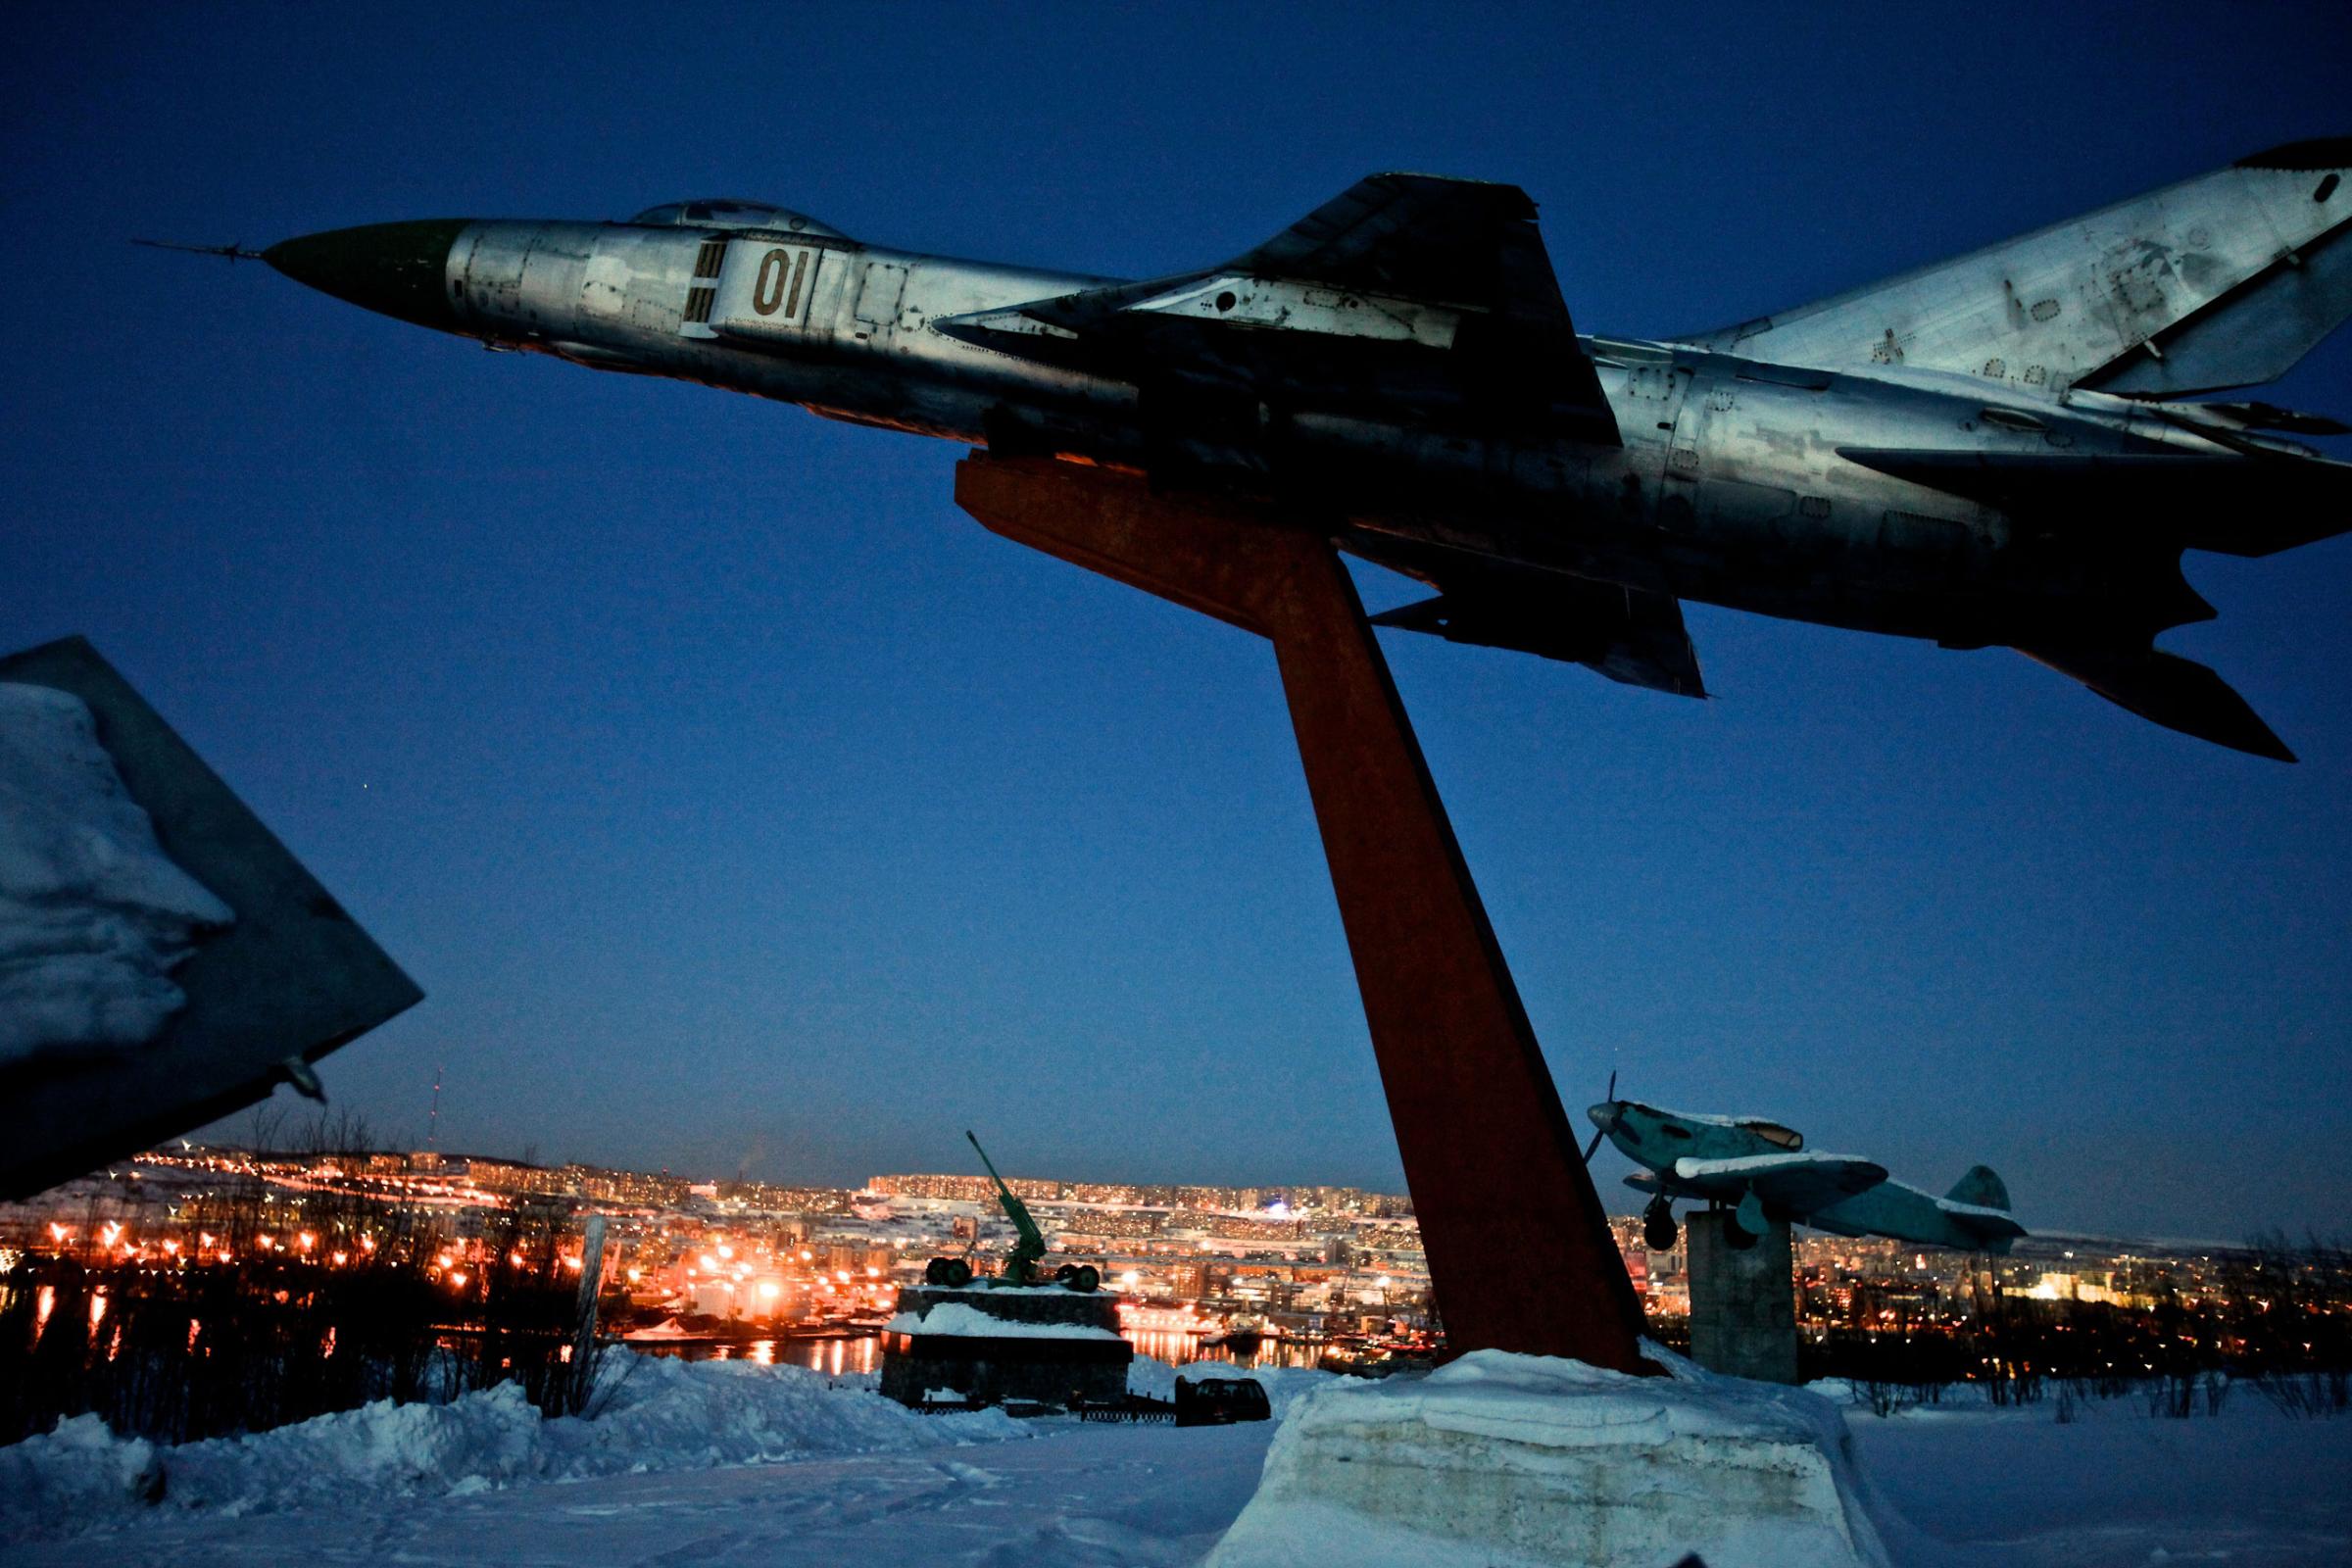 Fighter jet monument sits above Russian Arctic city